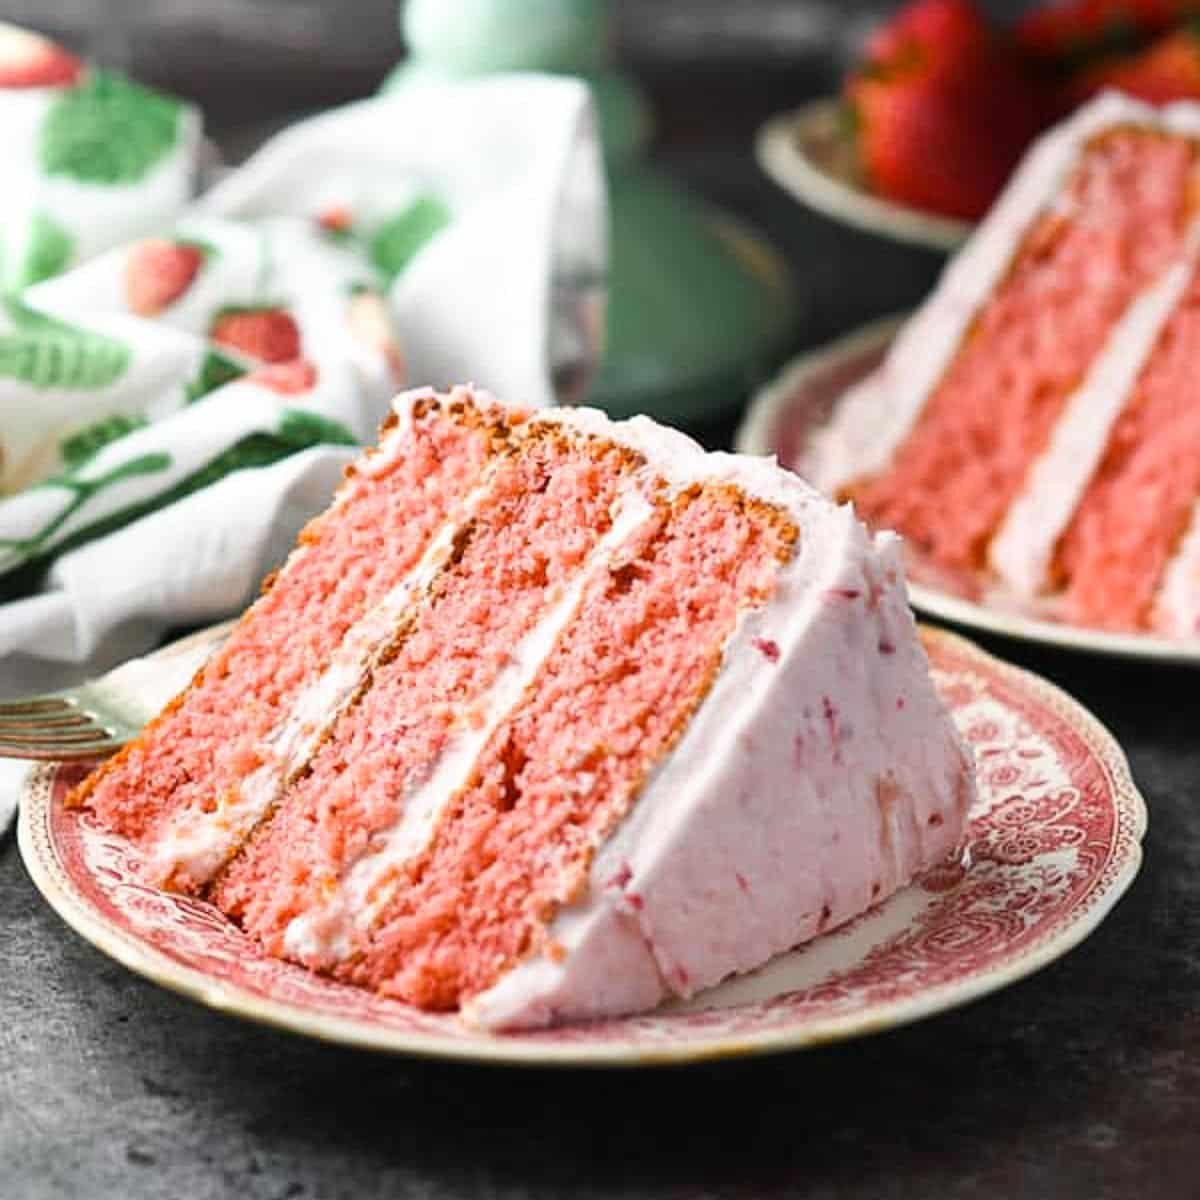 Details 68+ southern strawberry cake latest - in.daotaonec